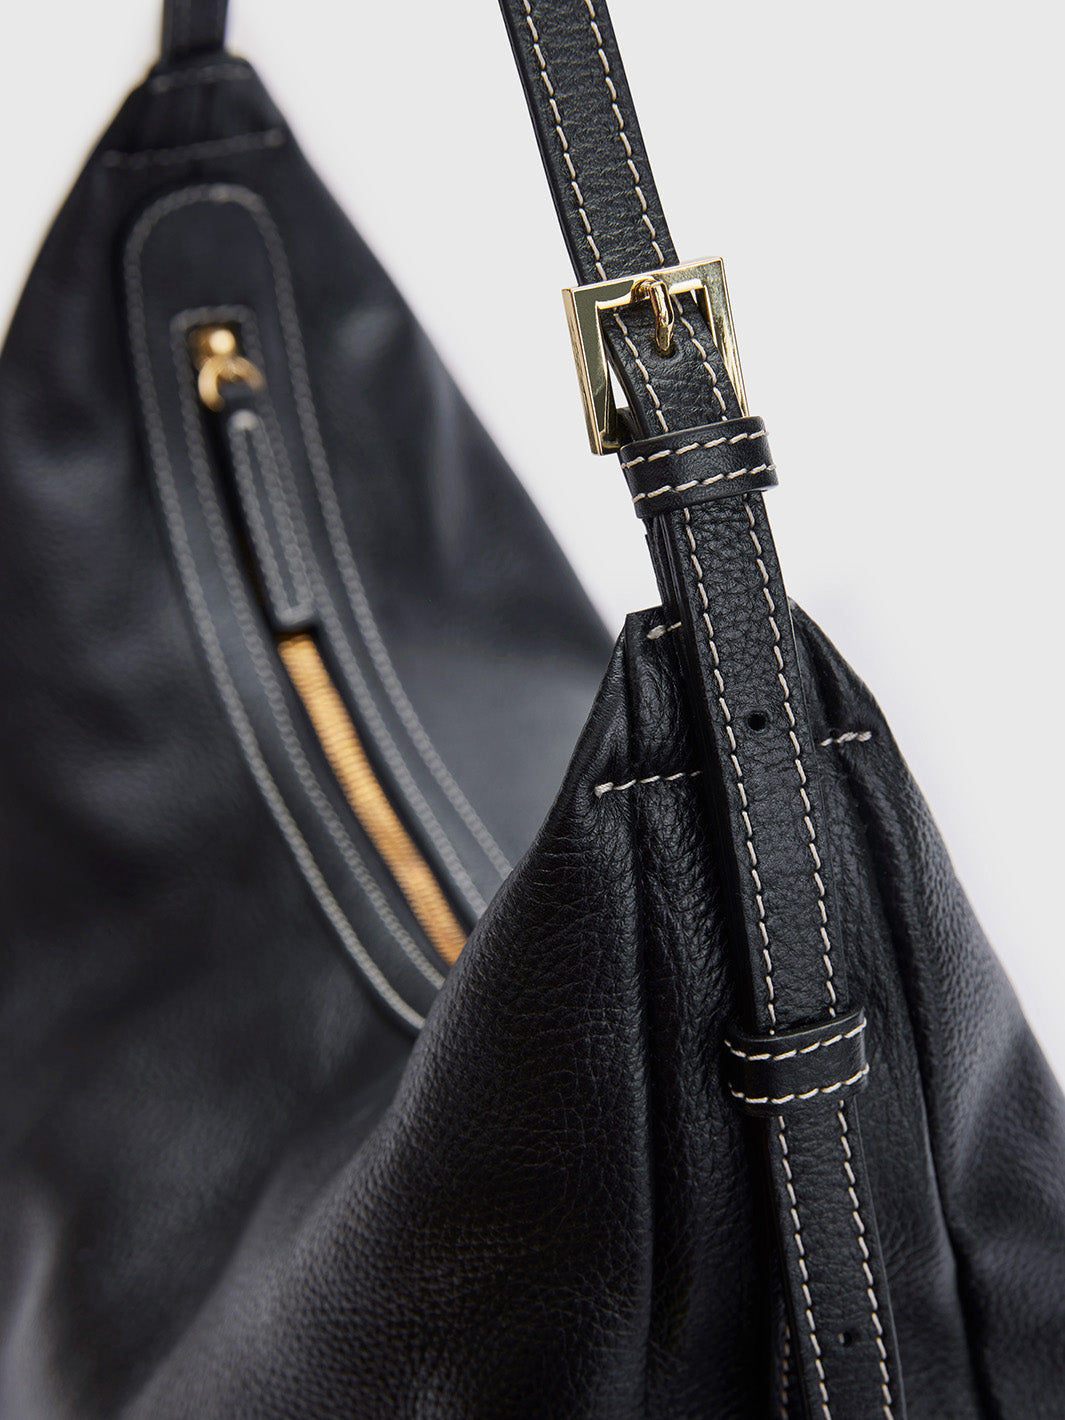 Potenza Black/Contrast Stitch Grained leather Large hobo bag